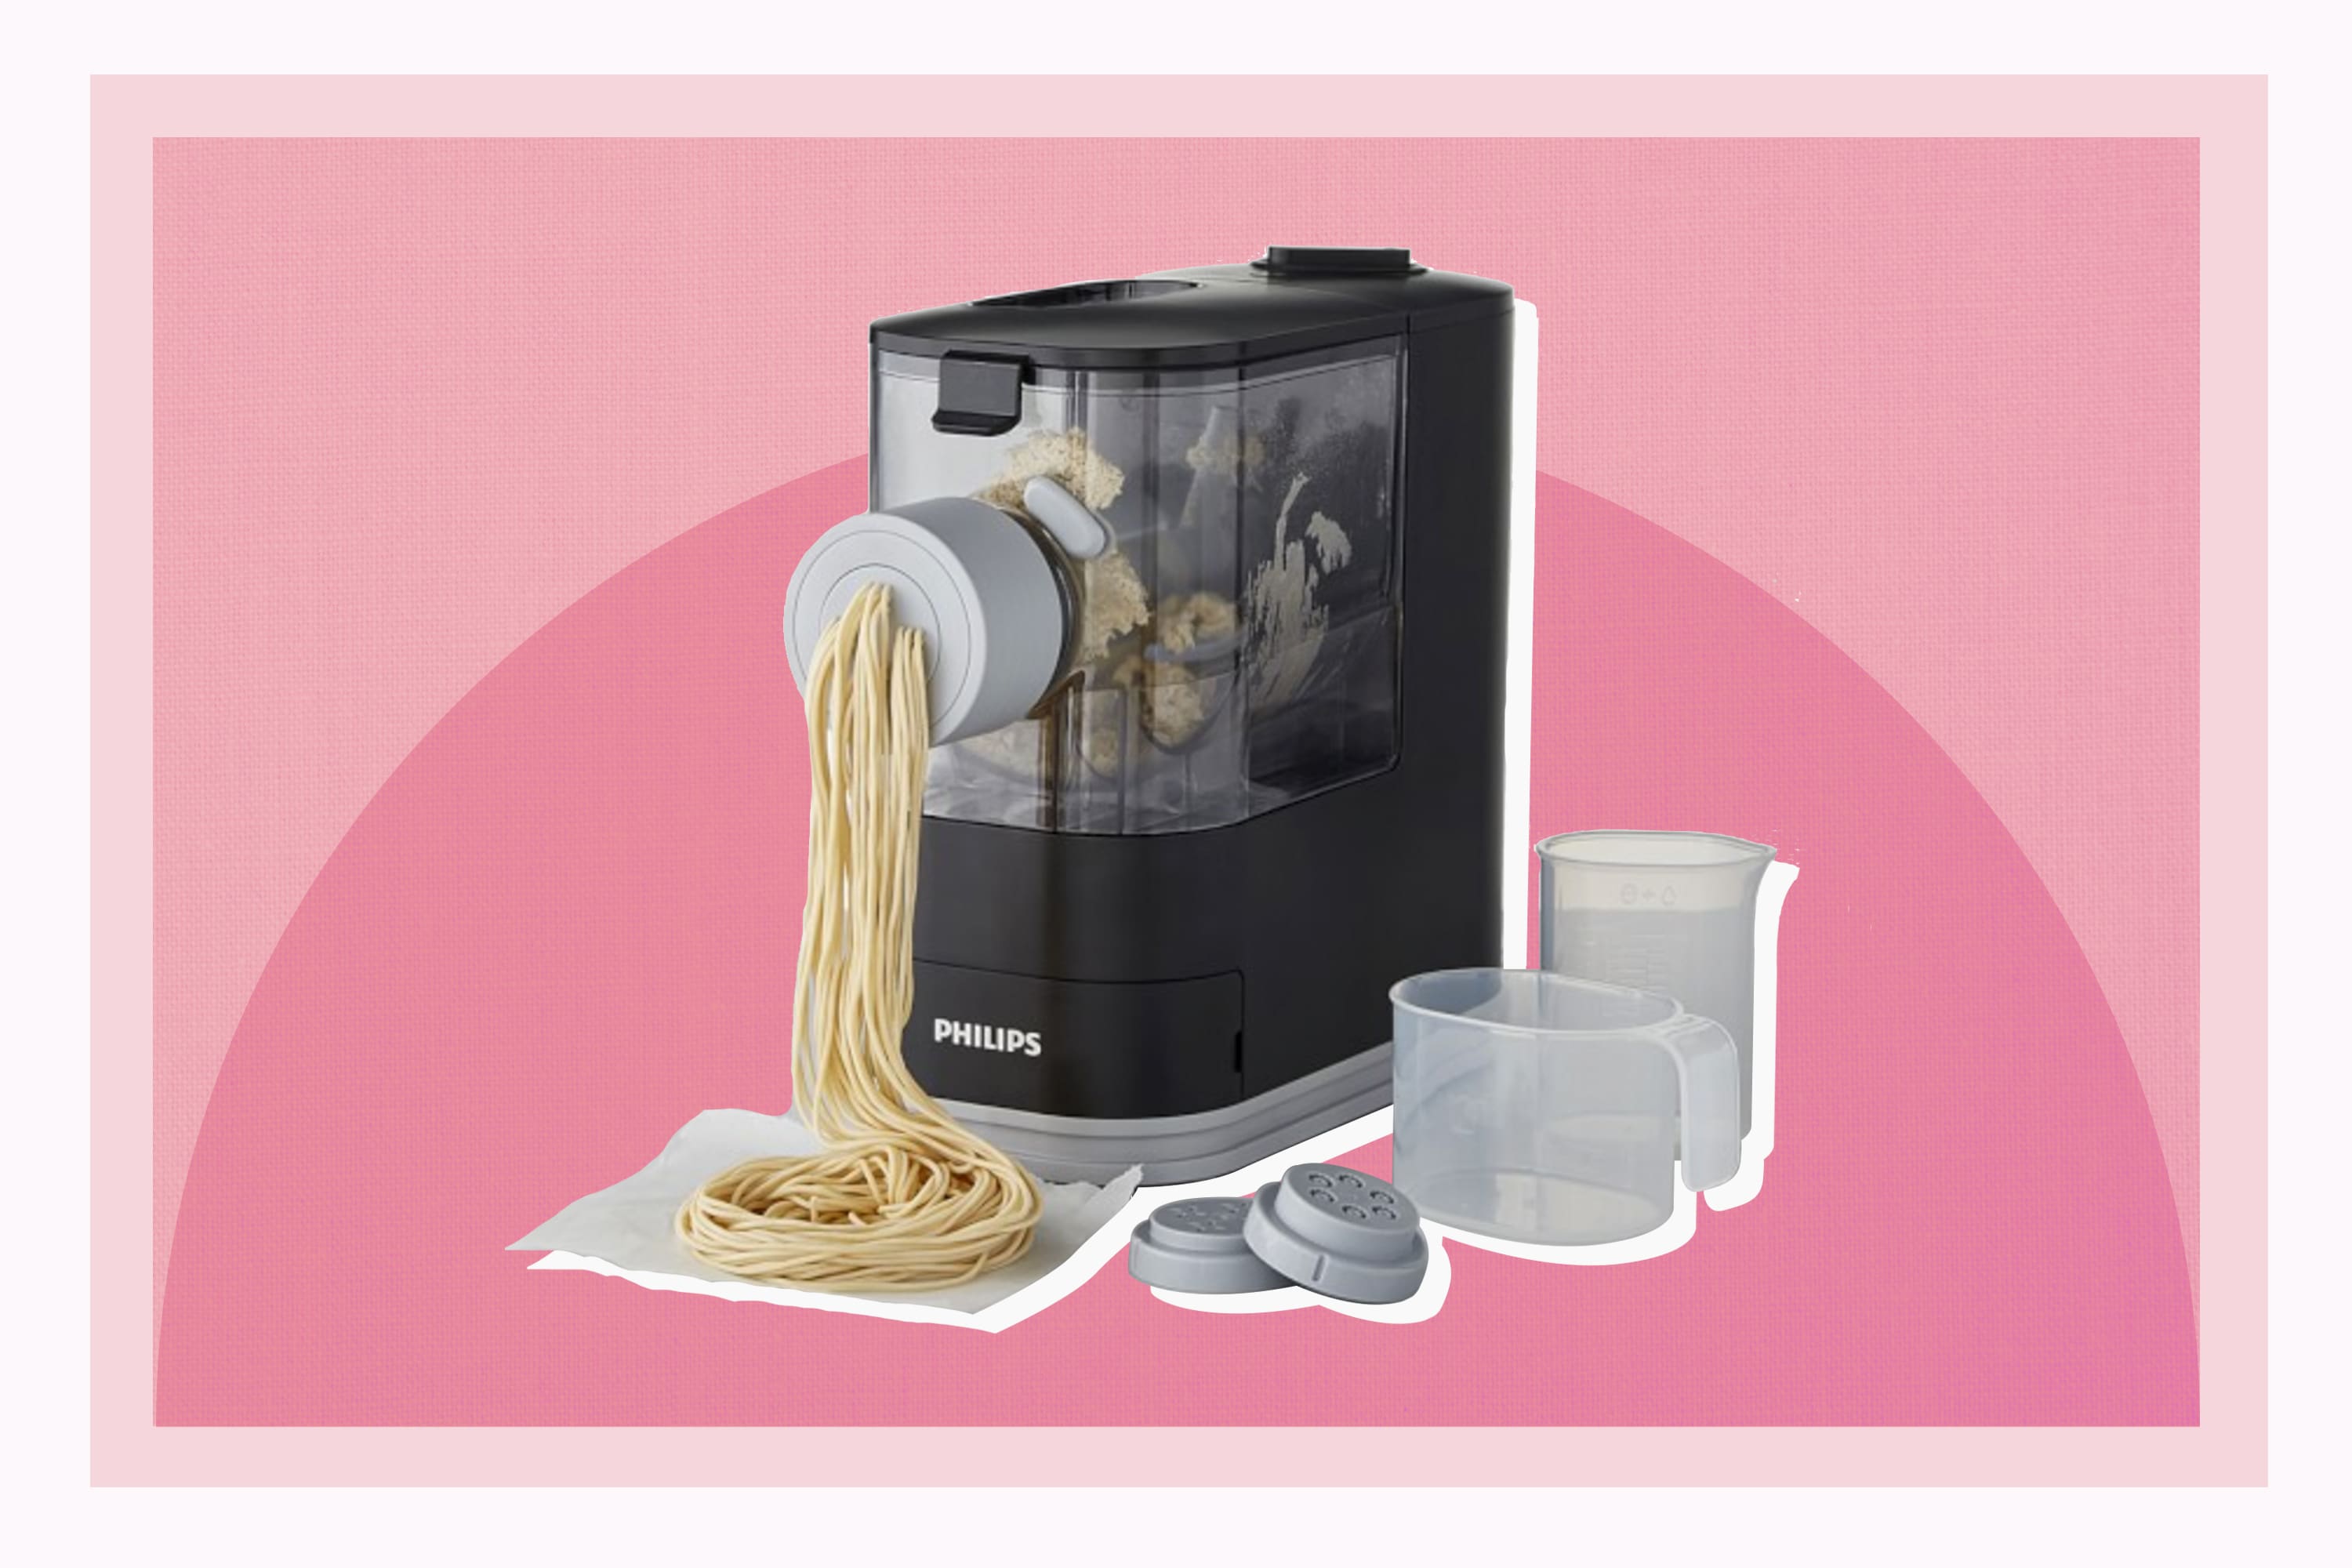 Philips Pasta Maker (Super Newish) for Sale in Los Angeles, CA - OfferUp